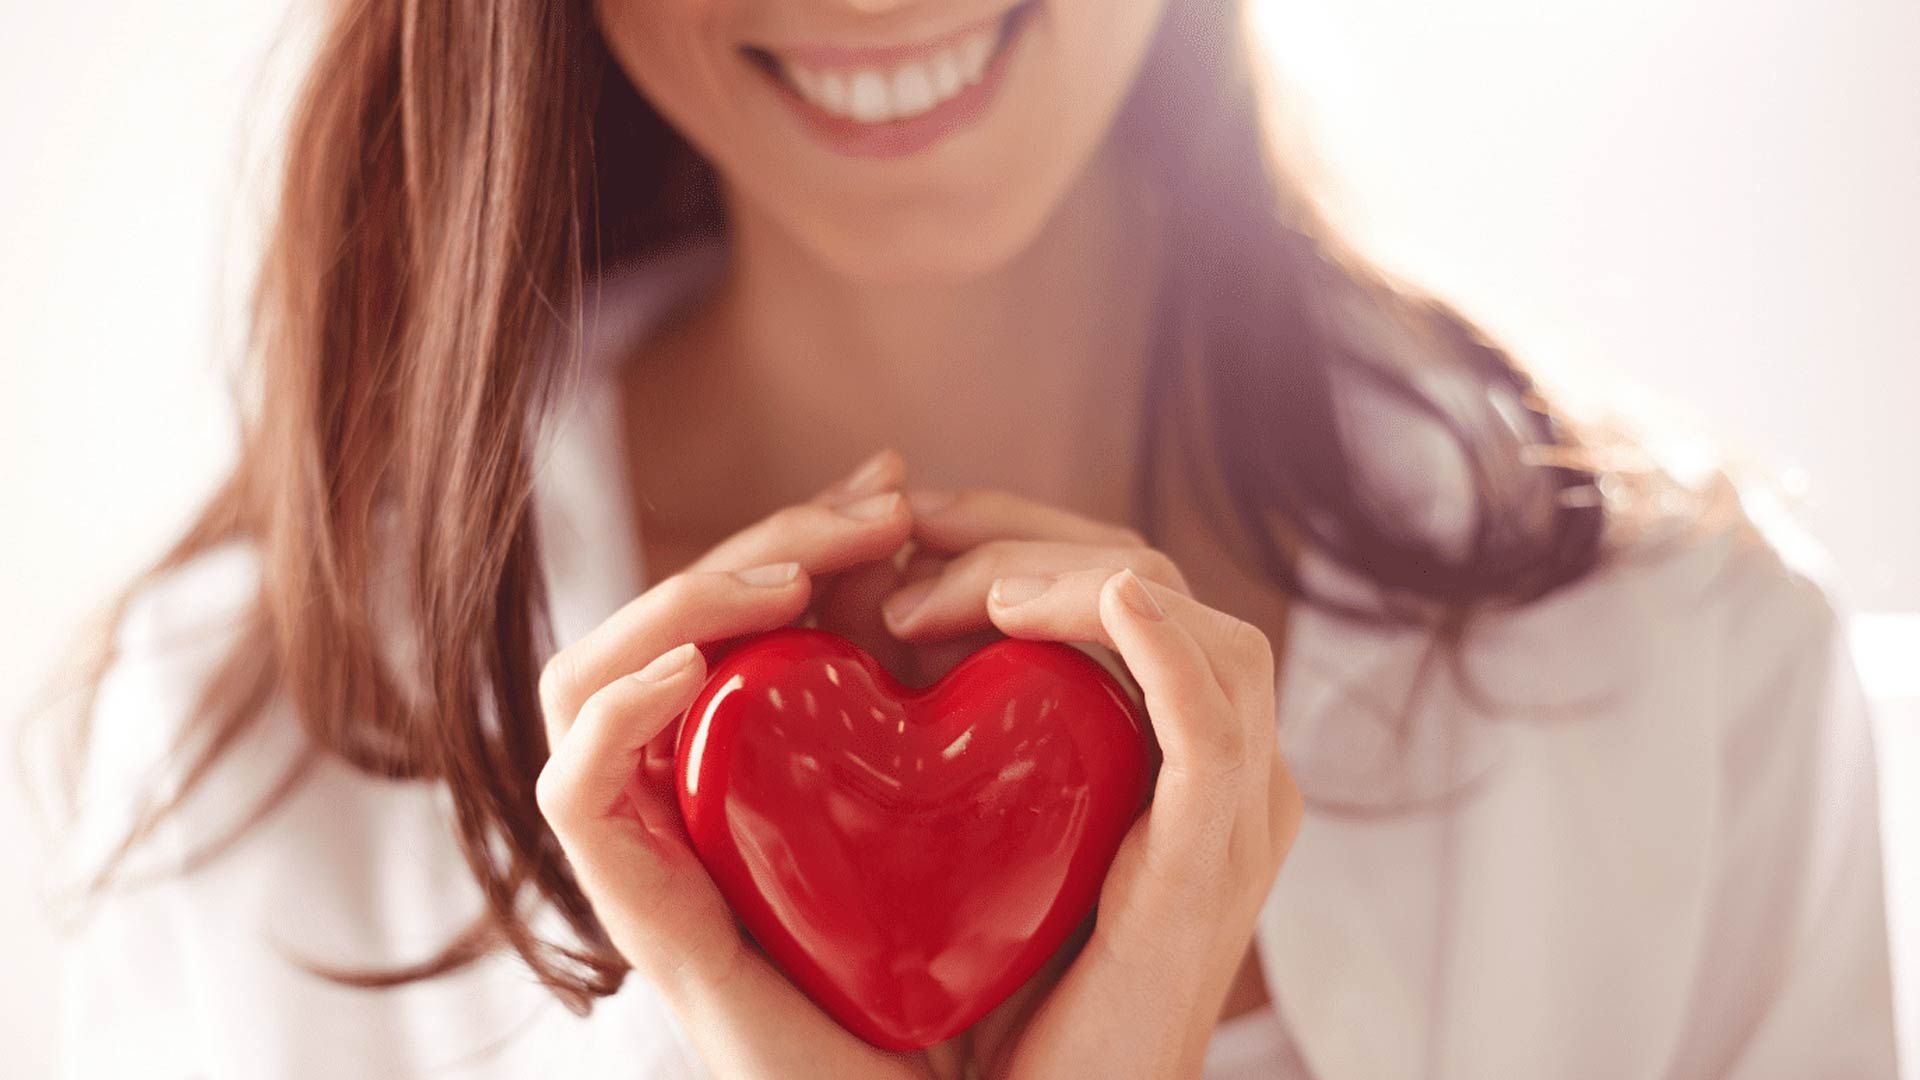 Healthy Heart, Healthy Mind: Understanding the Connection Between Mental Health and Your Body